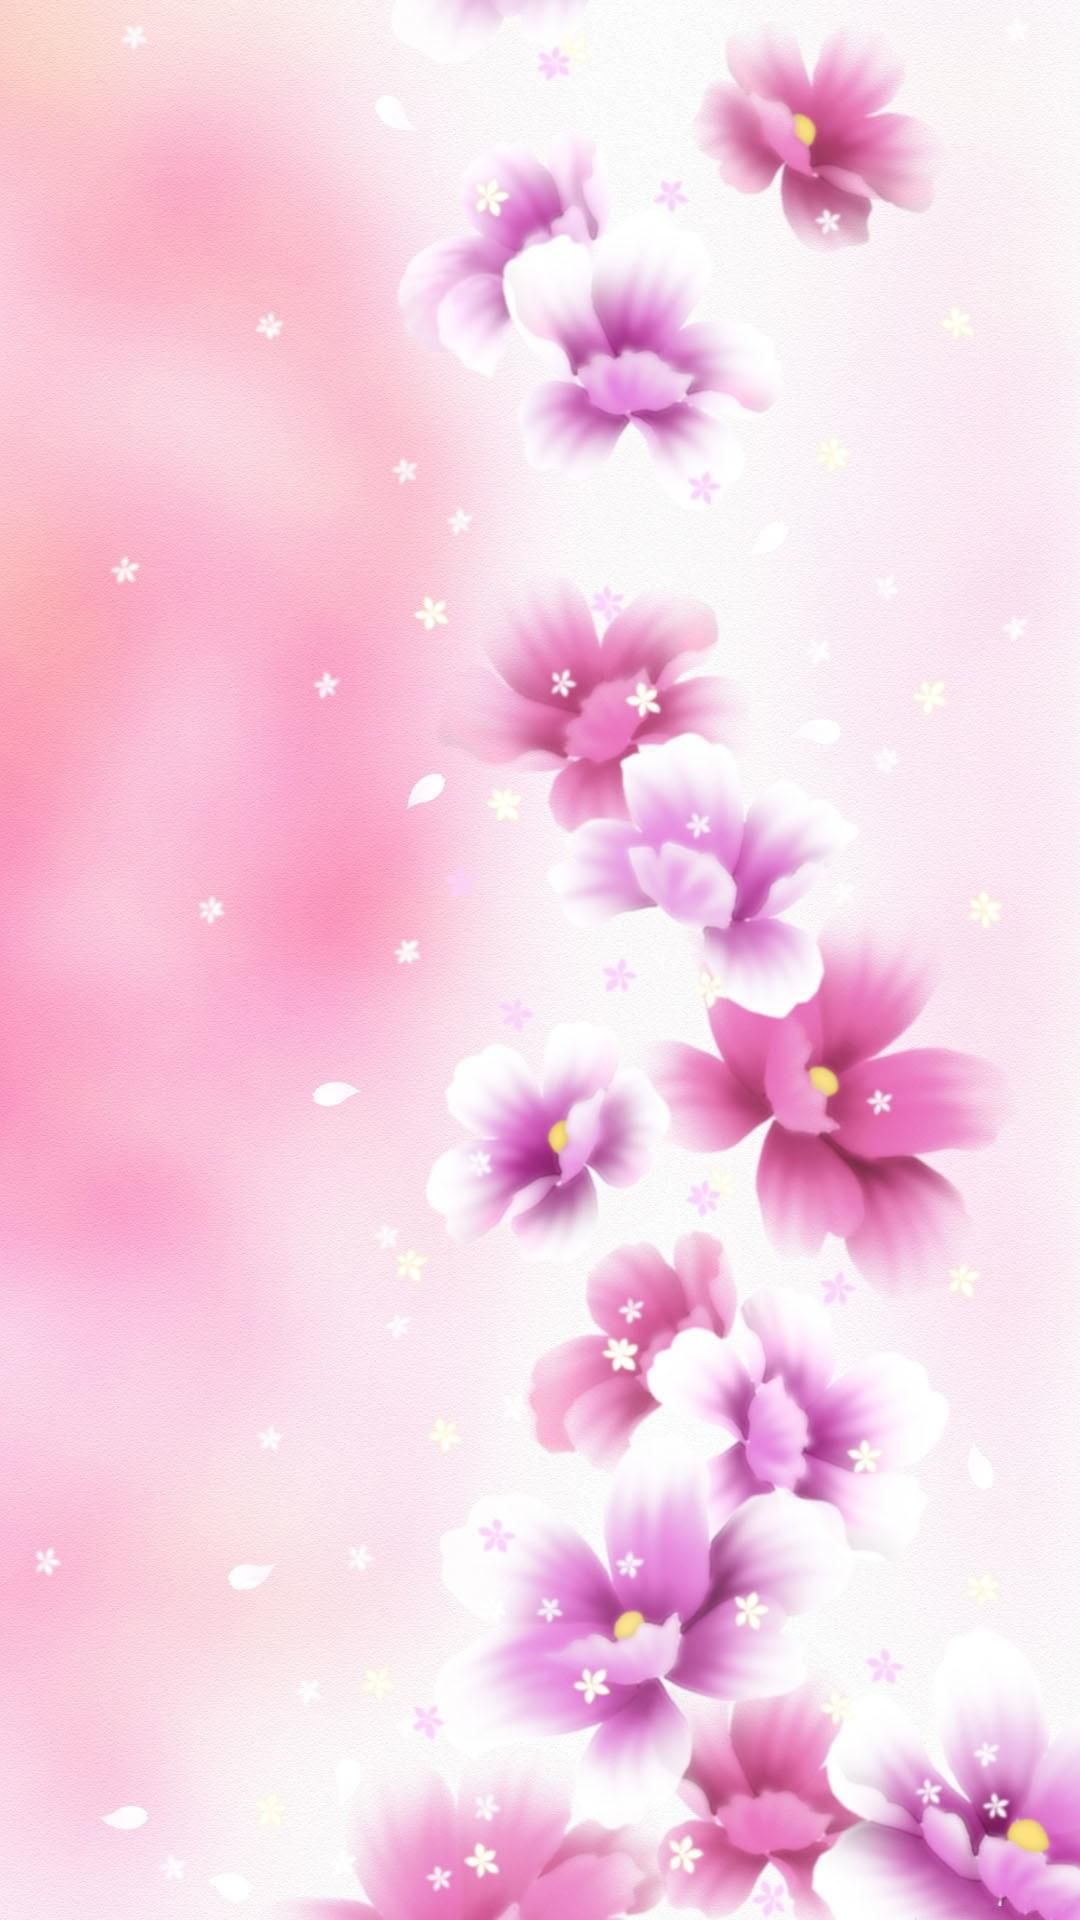 Girly Wallpaper For Android